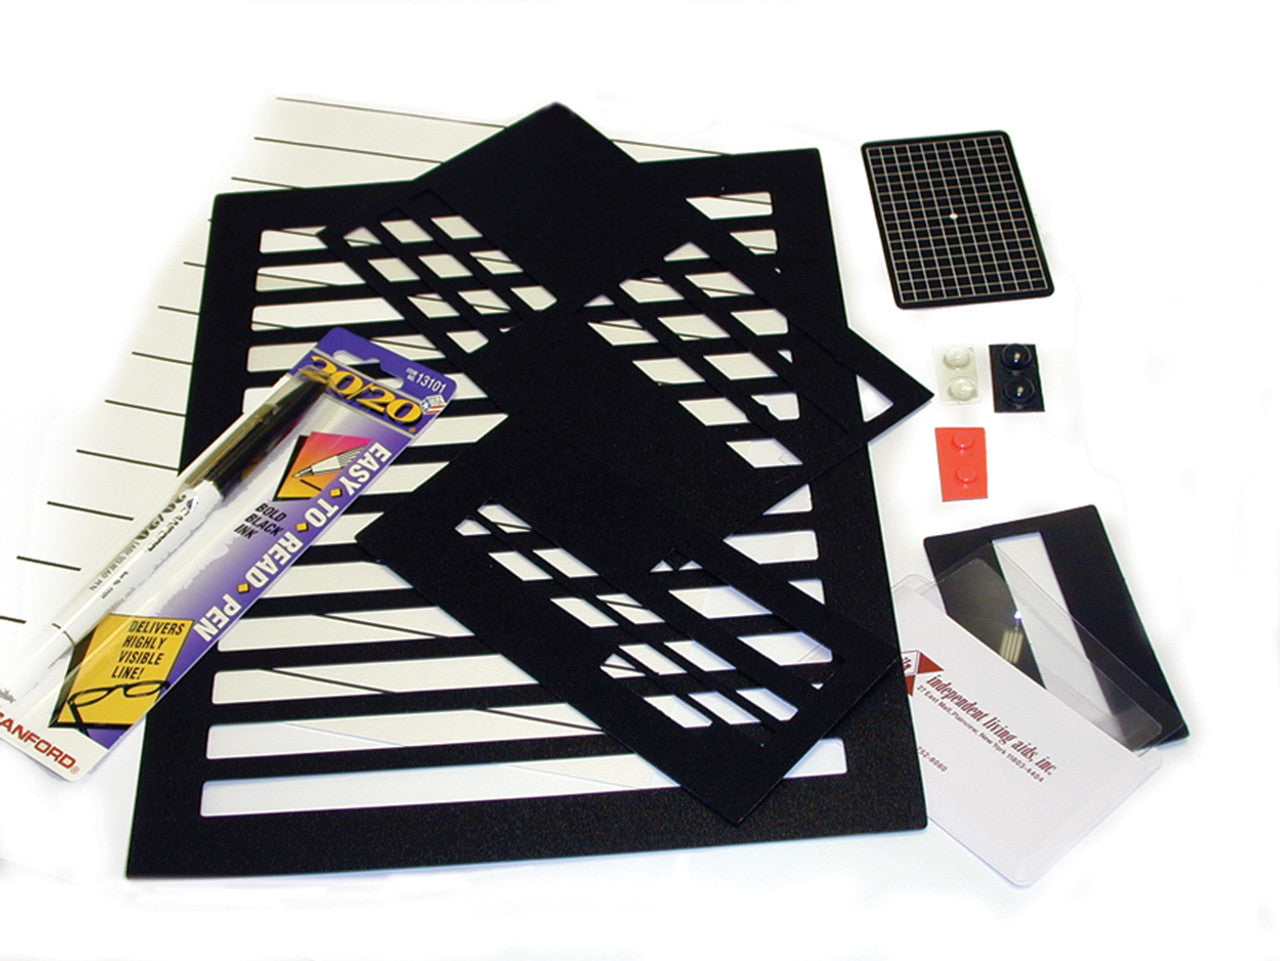 Low Vision Essentials Kit shown with an assortment of bump dots, varioussignature and letter writing guides and a sample of large lined paper, and a marker.